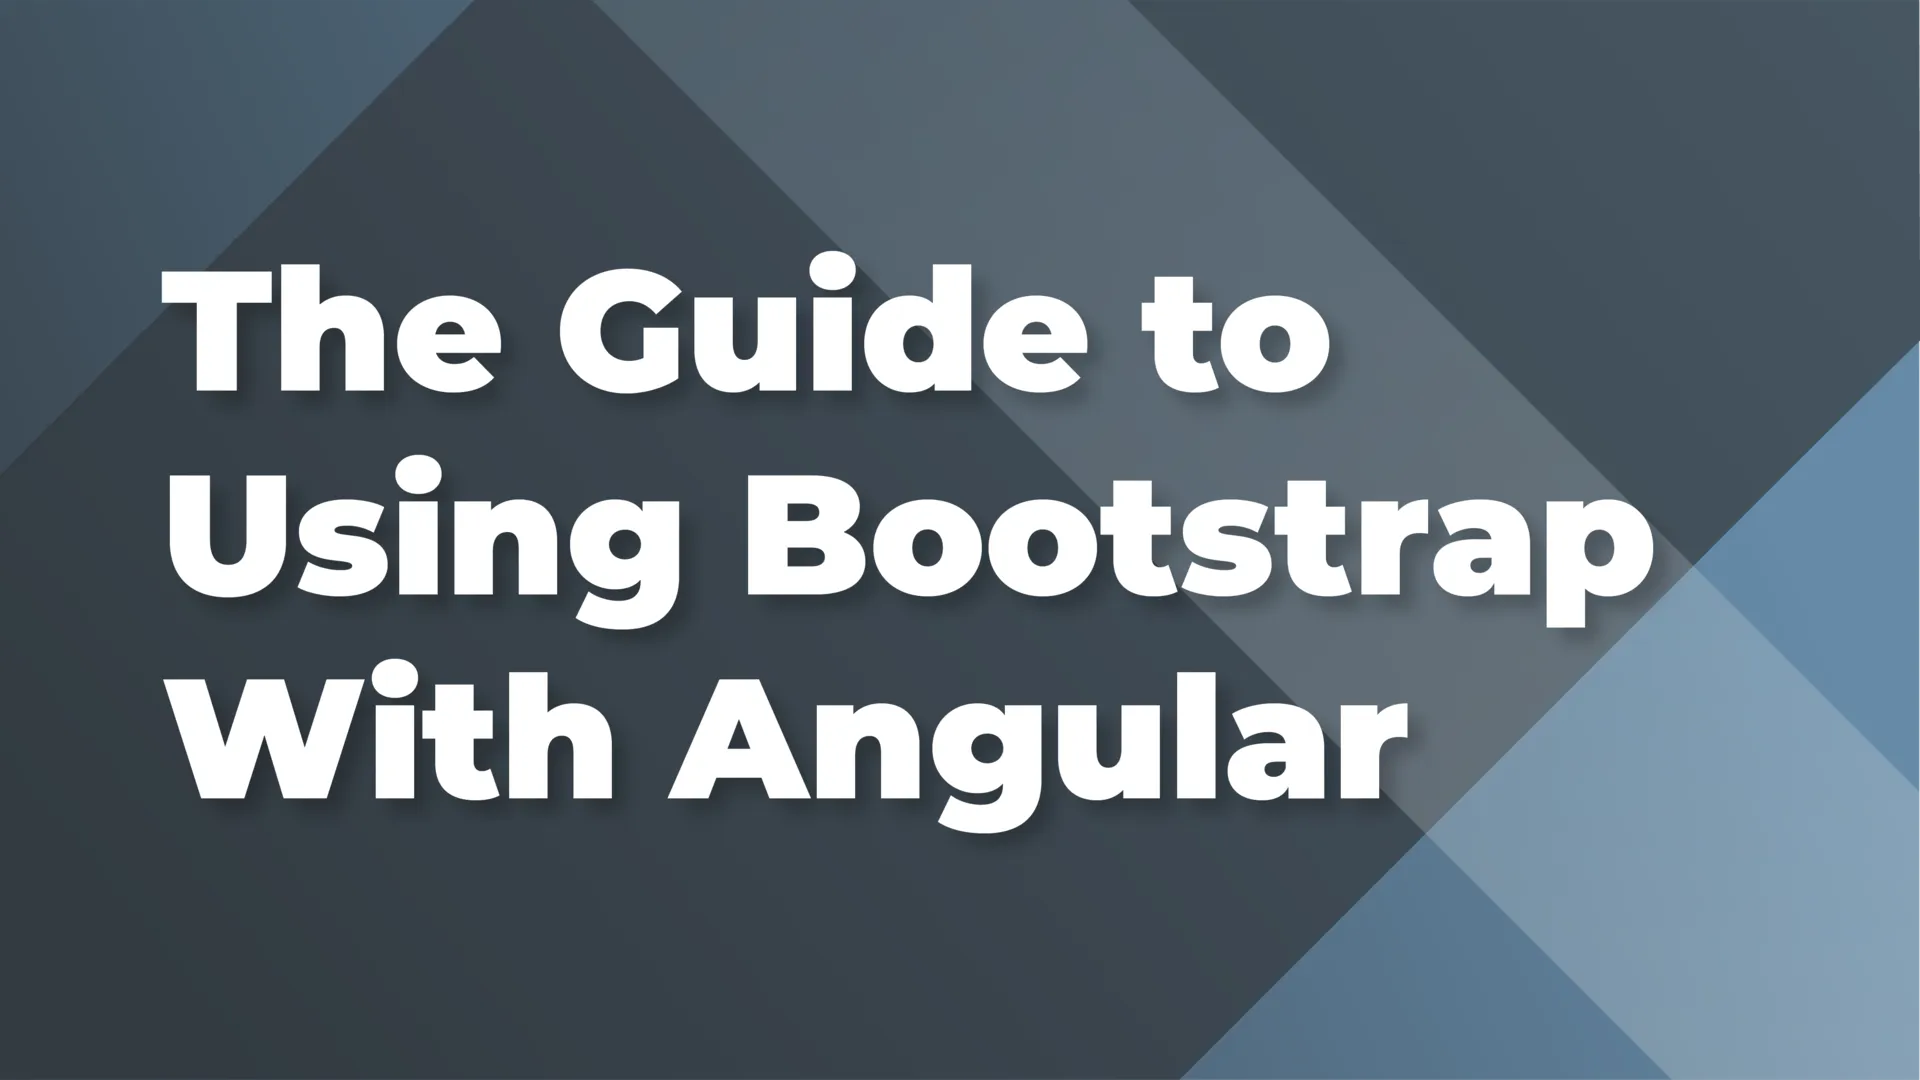 The Guide to Using Bootstrap With Angular